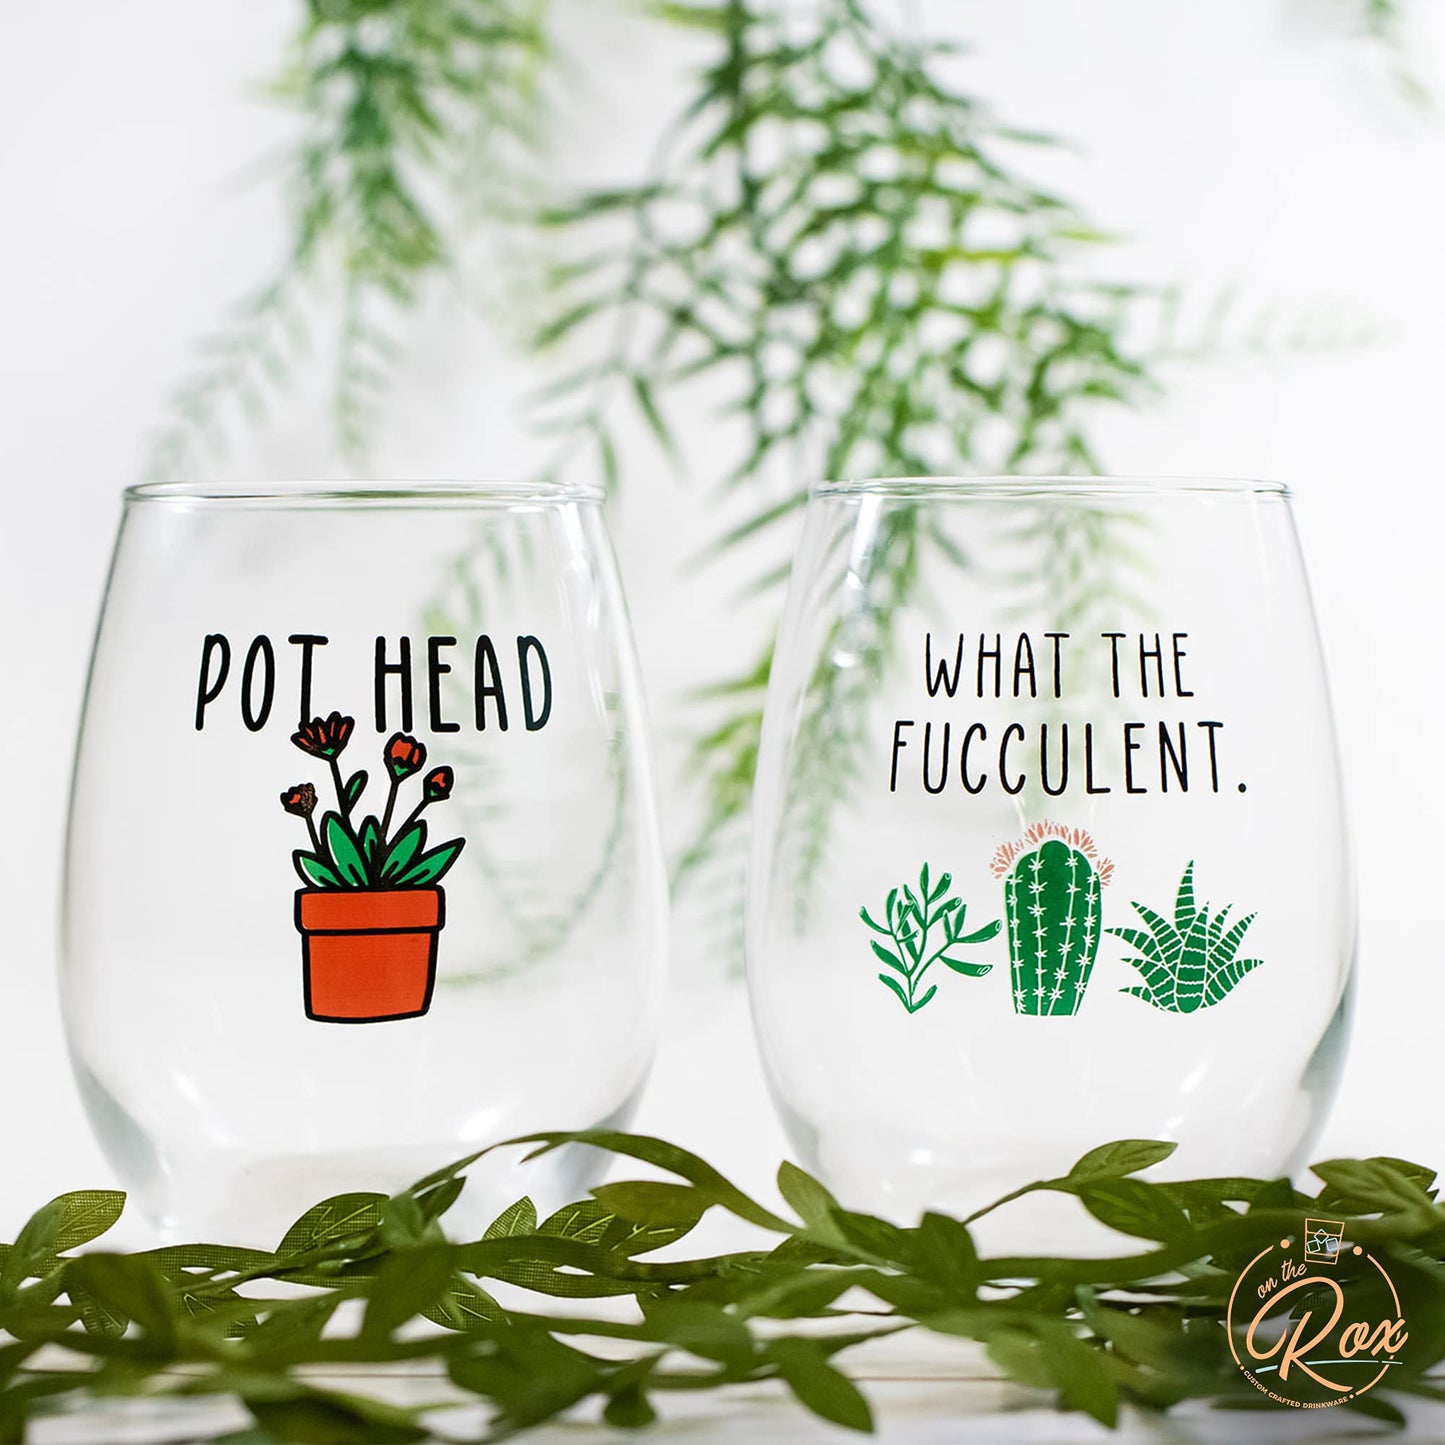 Succulent Plant Cactus Gifts for Women- Set of 2 Funny Wine Glasses 15oz - Plant Lover Gift Mug - What the Fucculent- Pot Head